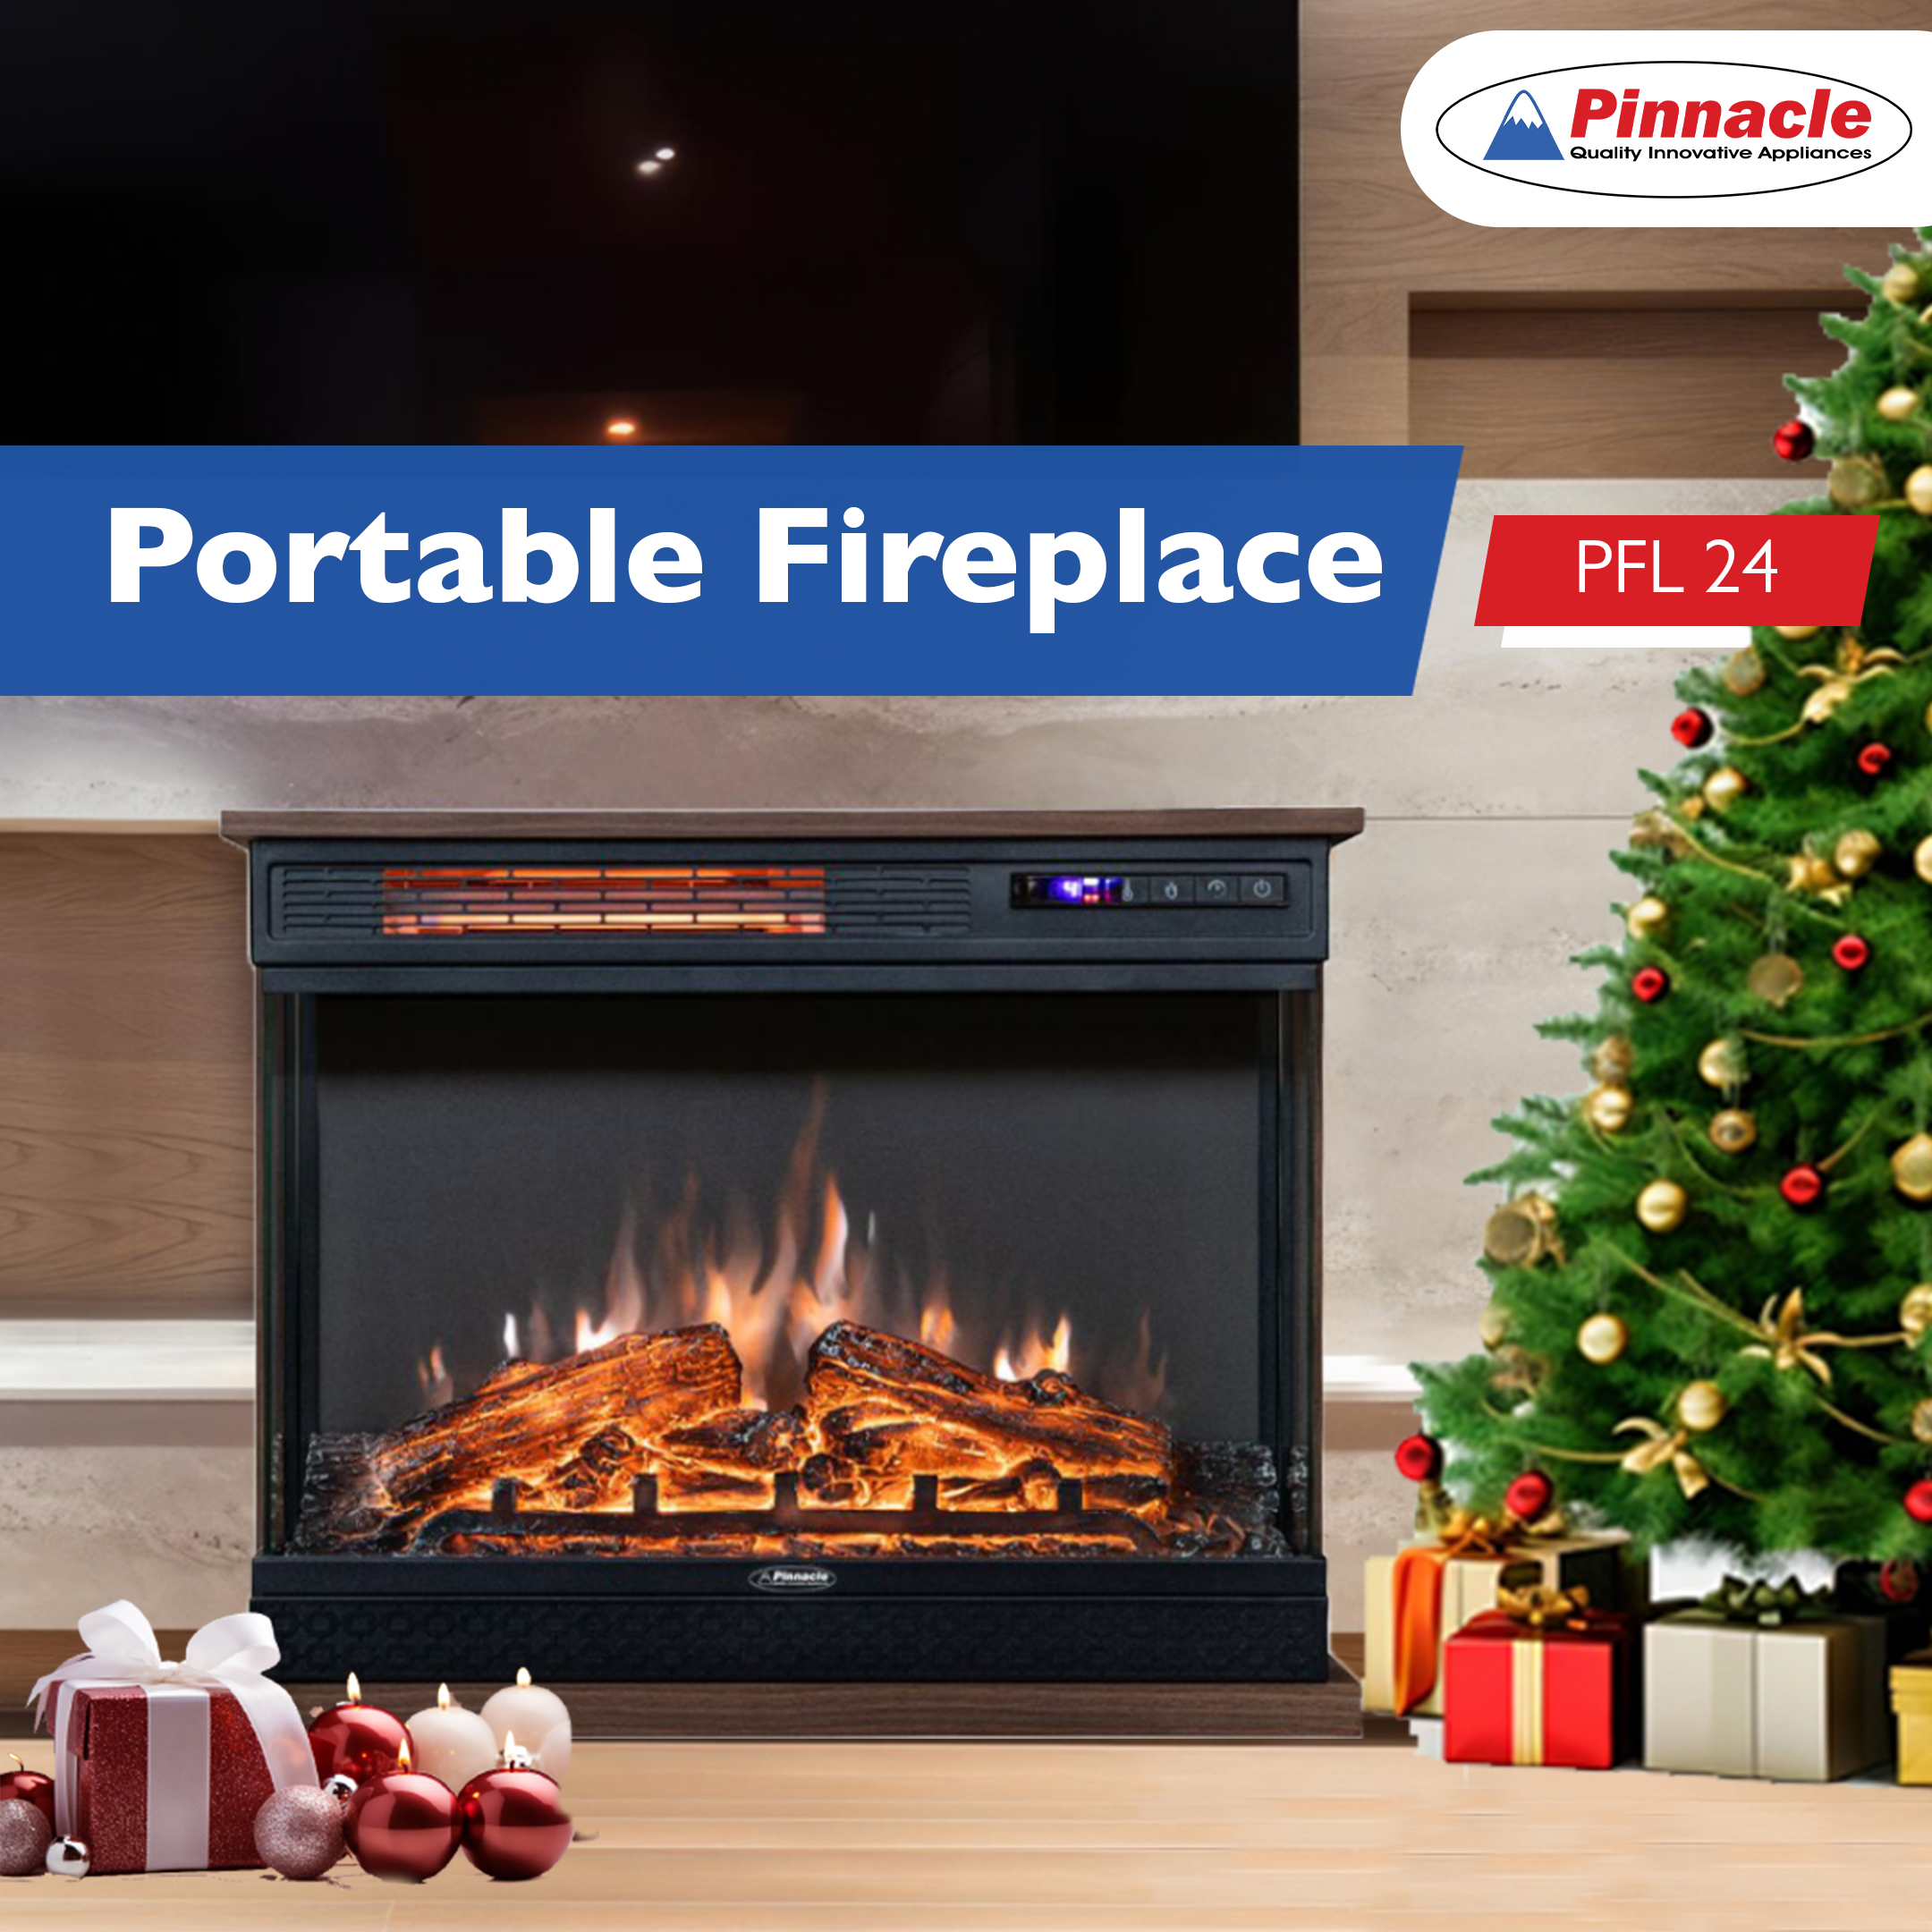 Pinnacle Combos Introduces the Portable Electric Fireplace with Remote and Multiple Color Options